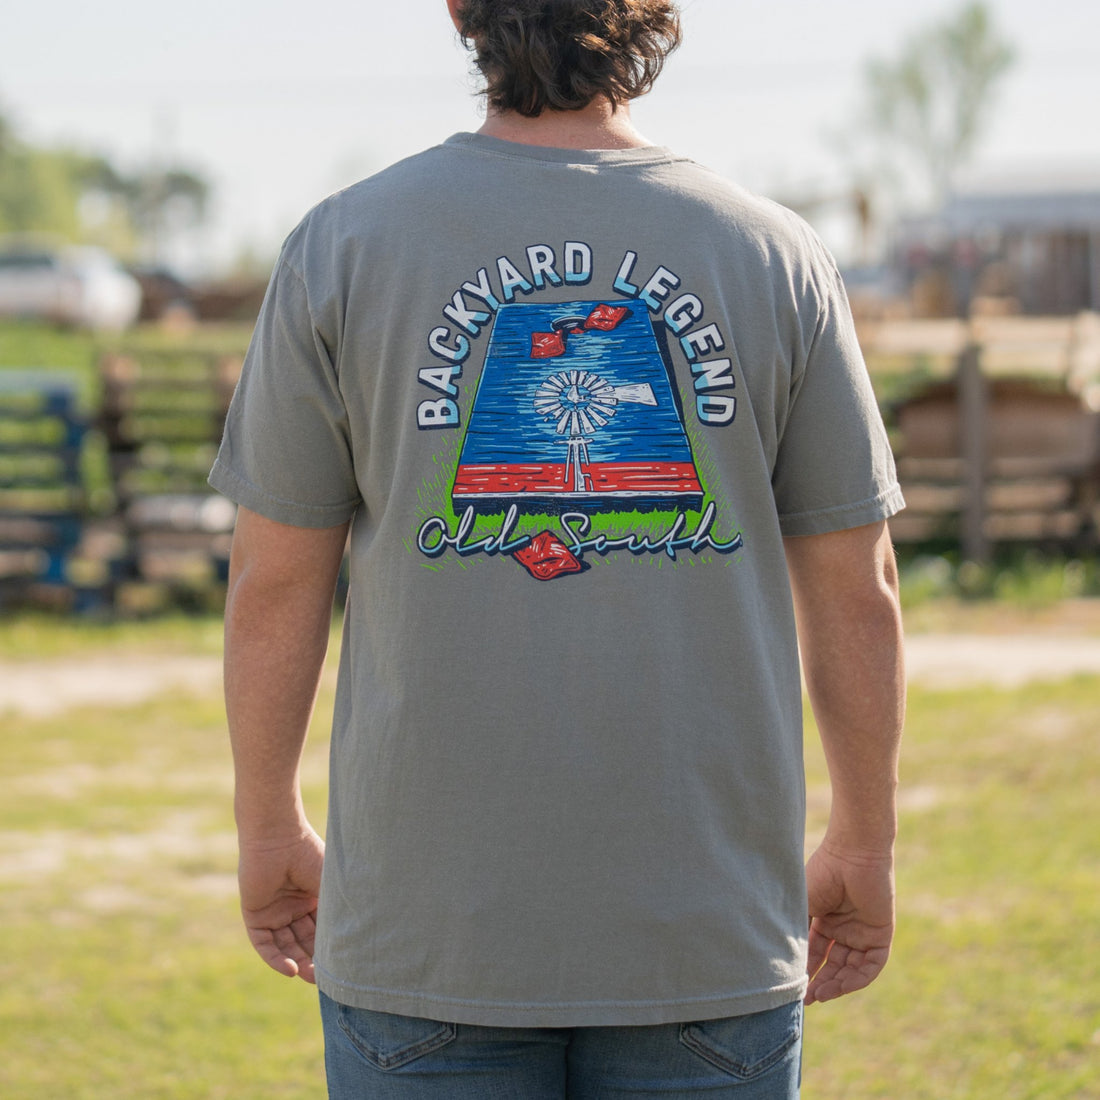 Backyard Legend Short Sleeve Tee by Old South